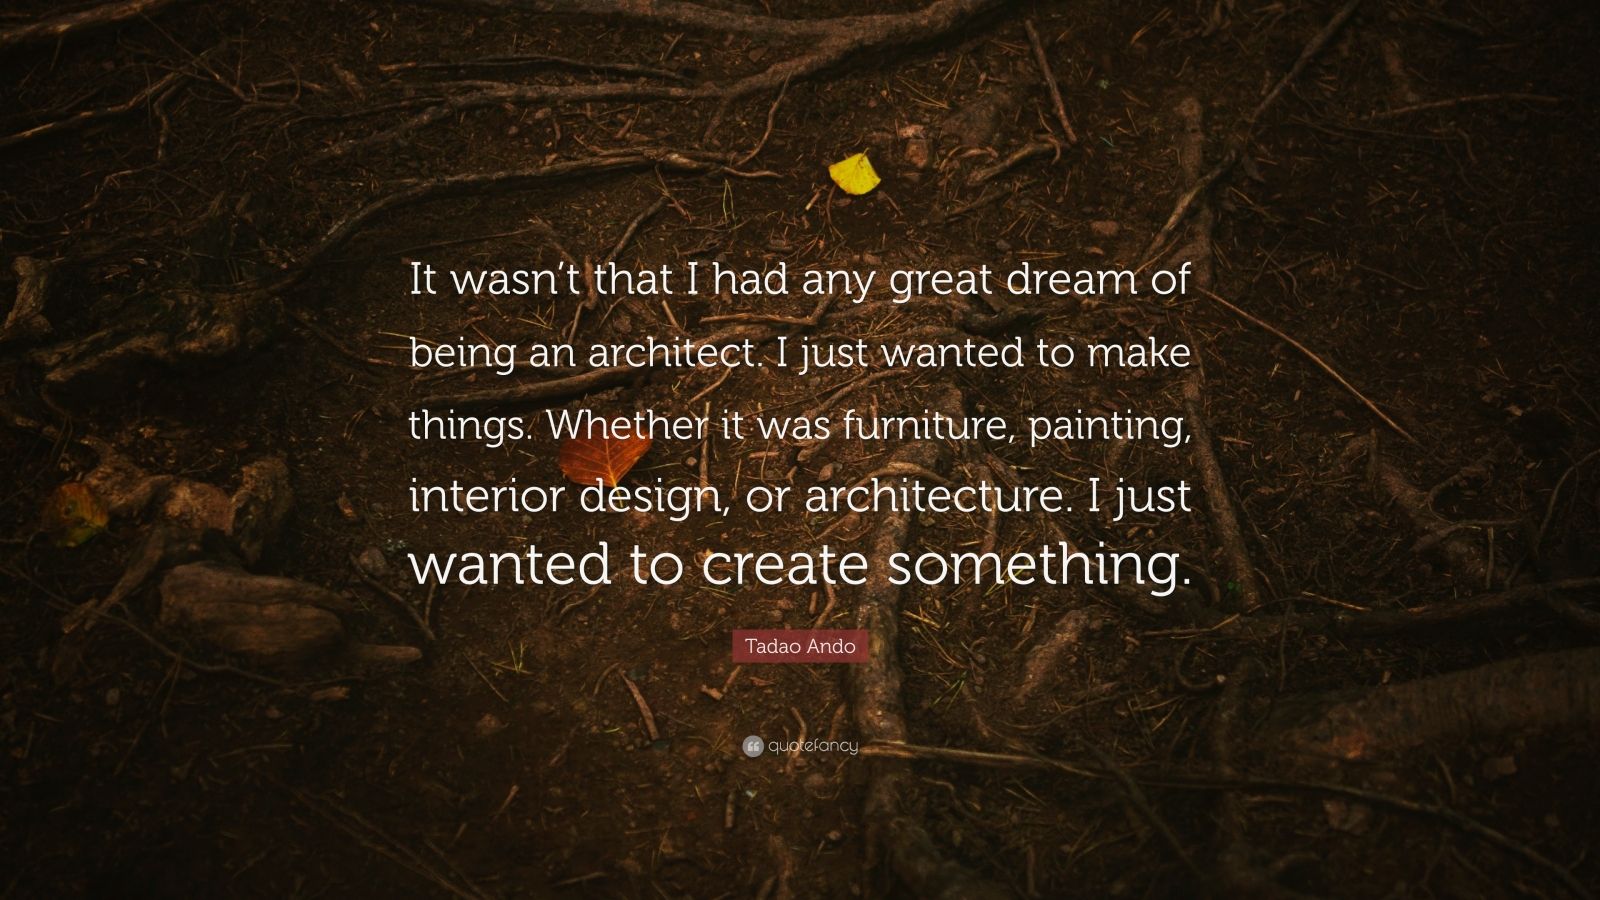 Tadao Ando Quote: "It wasn't that I had any great dream of ...